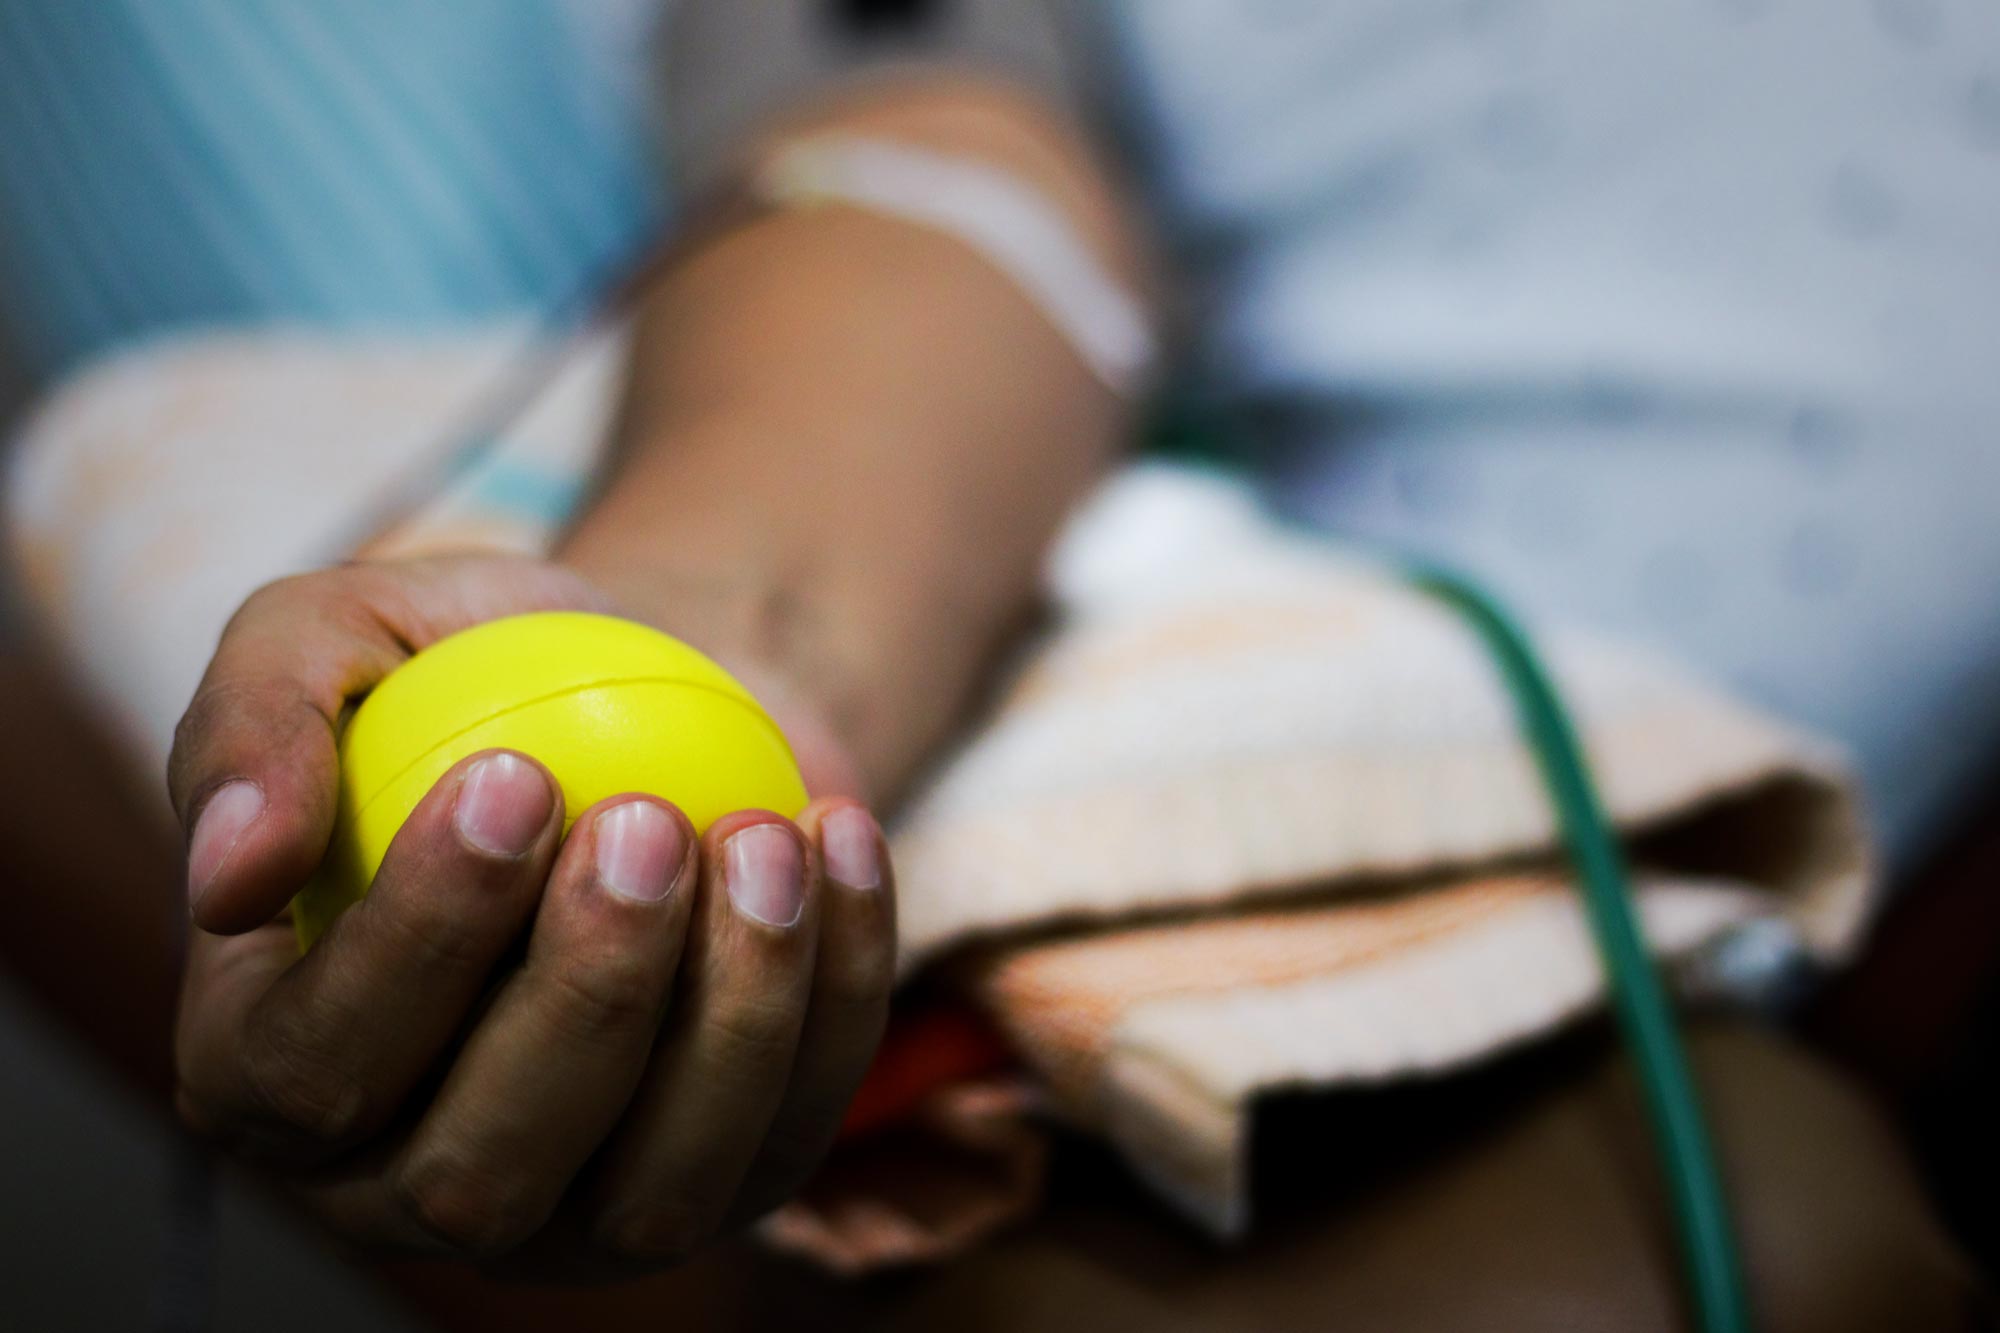 up close of patients hand clinching a stress ball